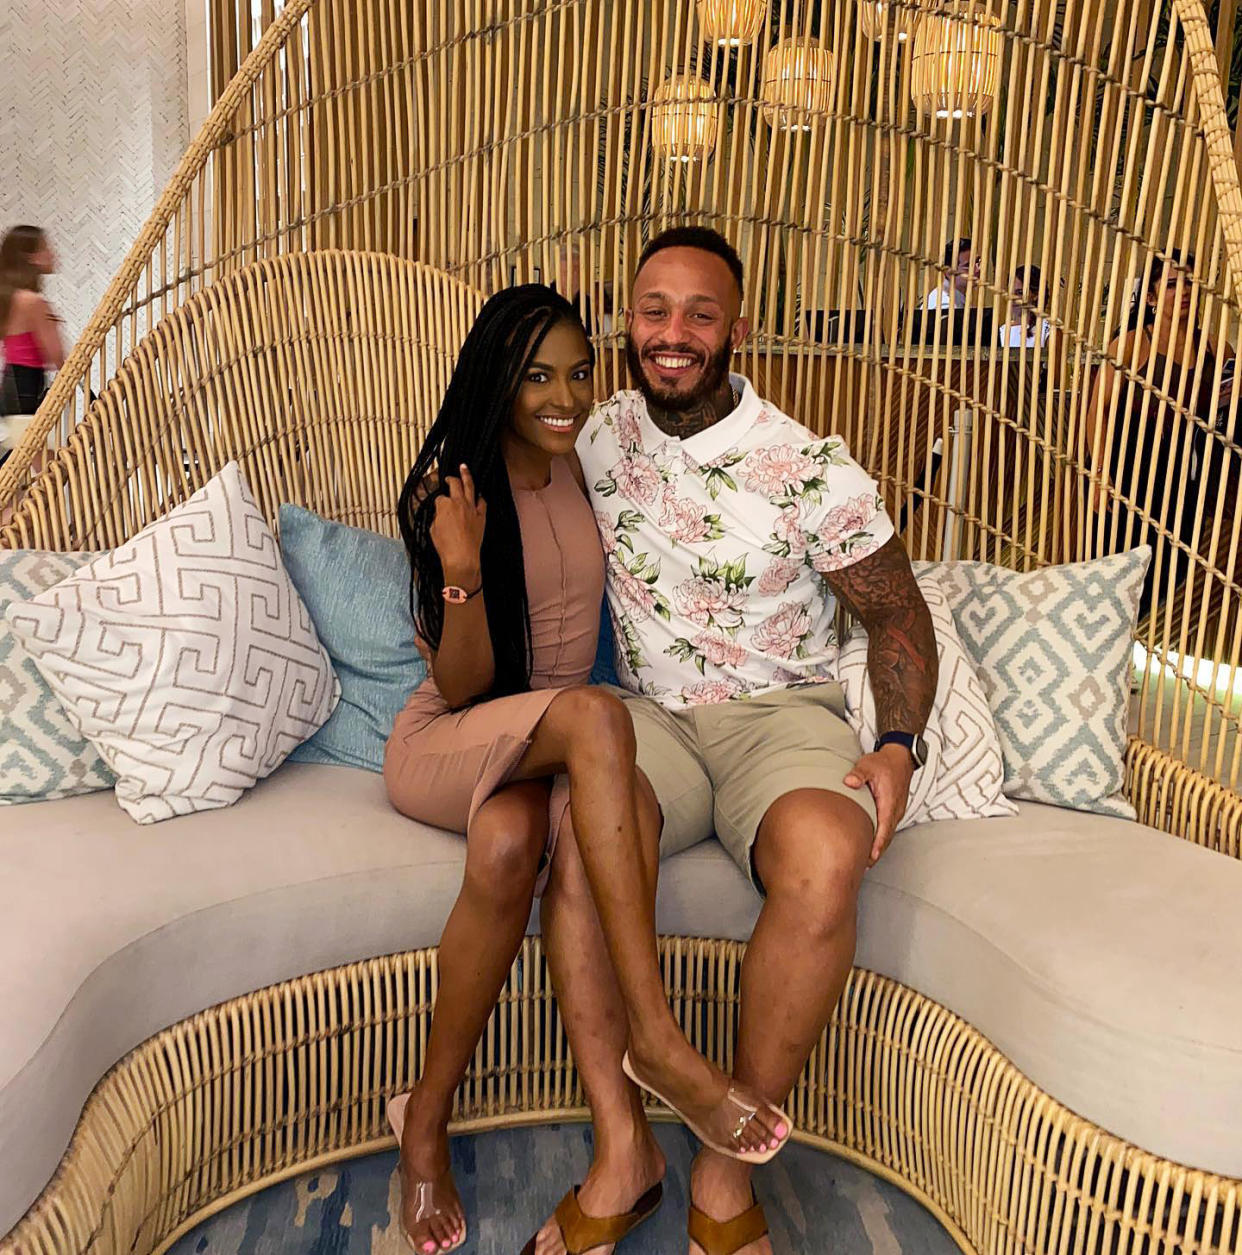 Married at First Sight's Katina Goode and Olajuwon Dickerson Take Romantic Vacation 1 Month After Split- 'I Am Truly Thankful' - 075